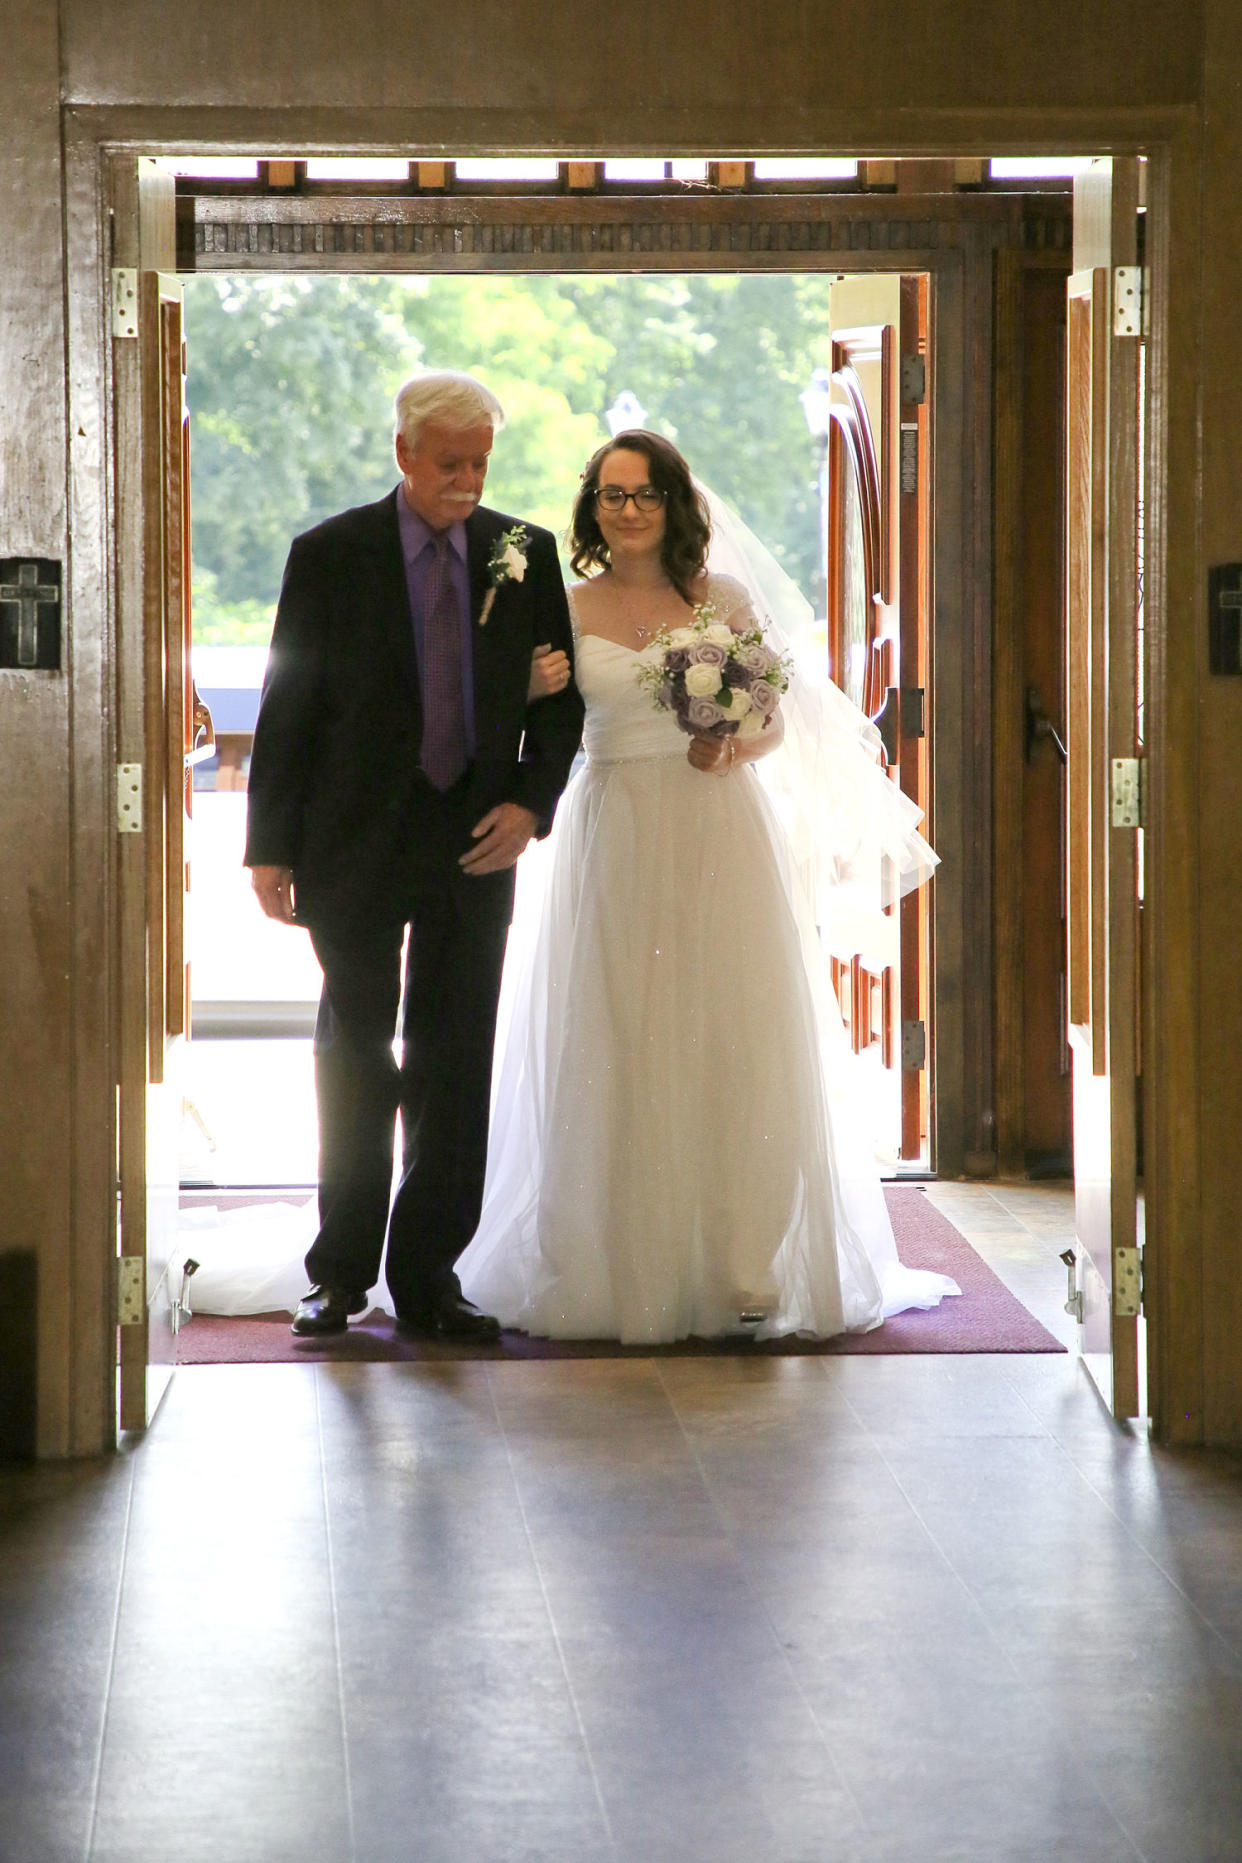 The author on her wedding day with her father. (Courtesy Chrissy Callahan
)